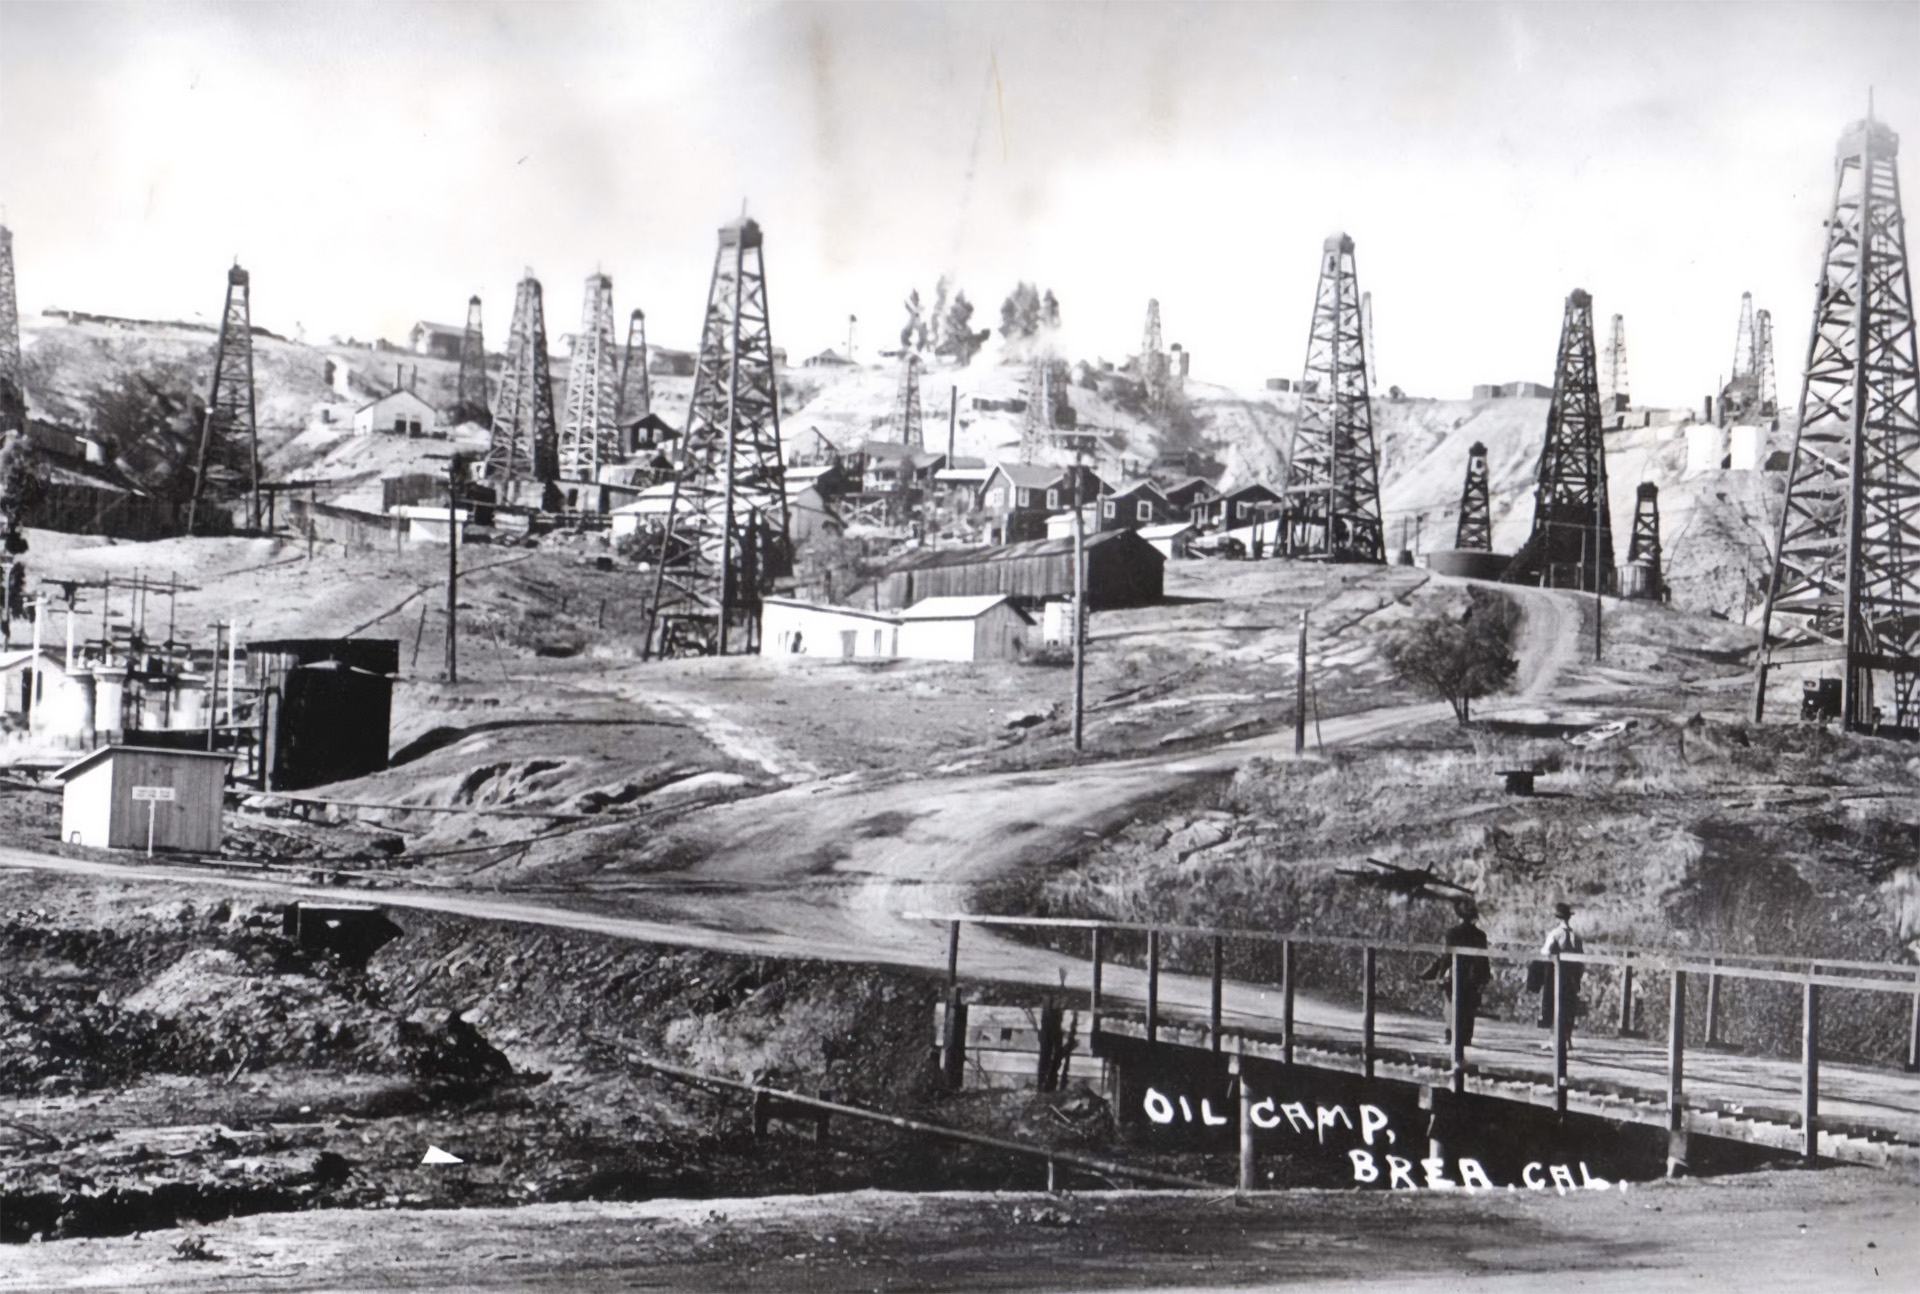 Photograph of an oil rig camp in Brea, California.